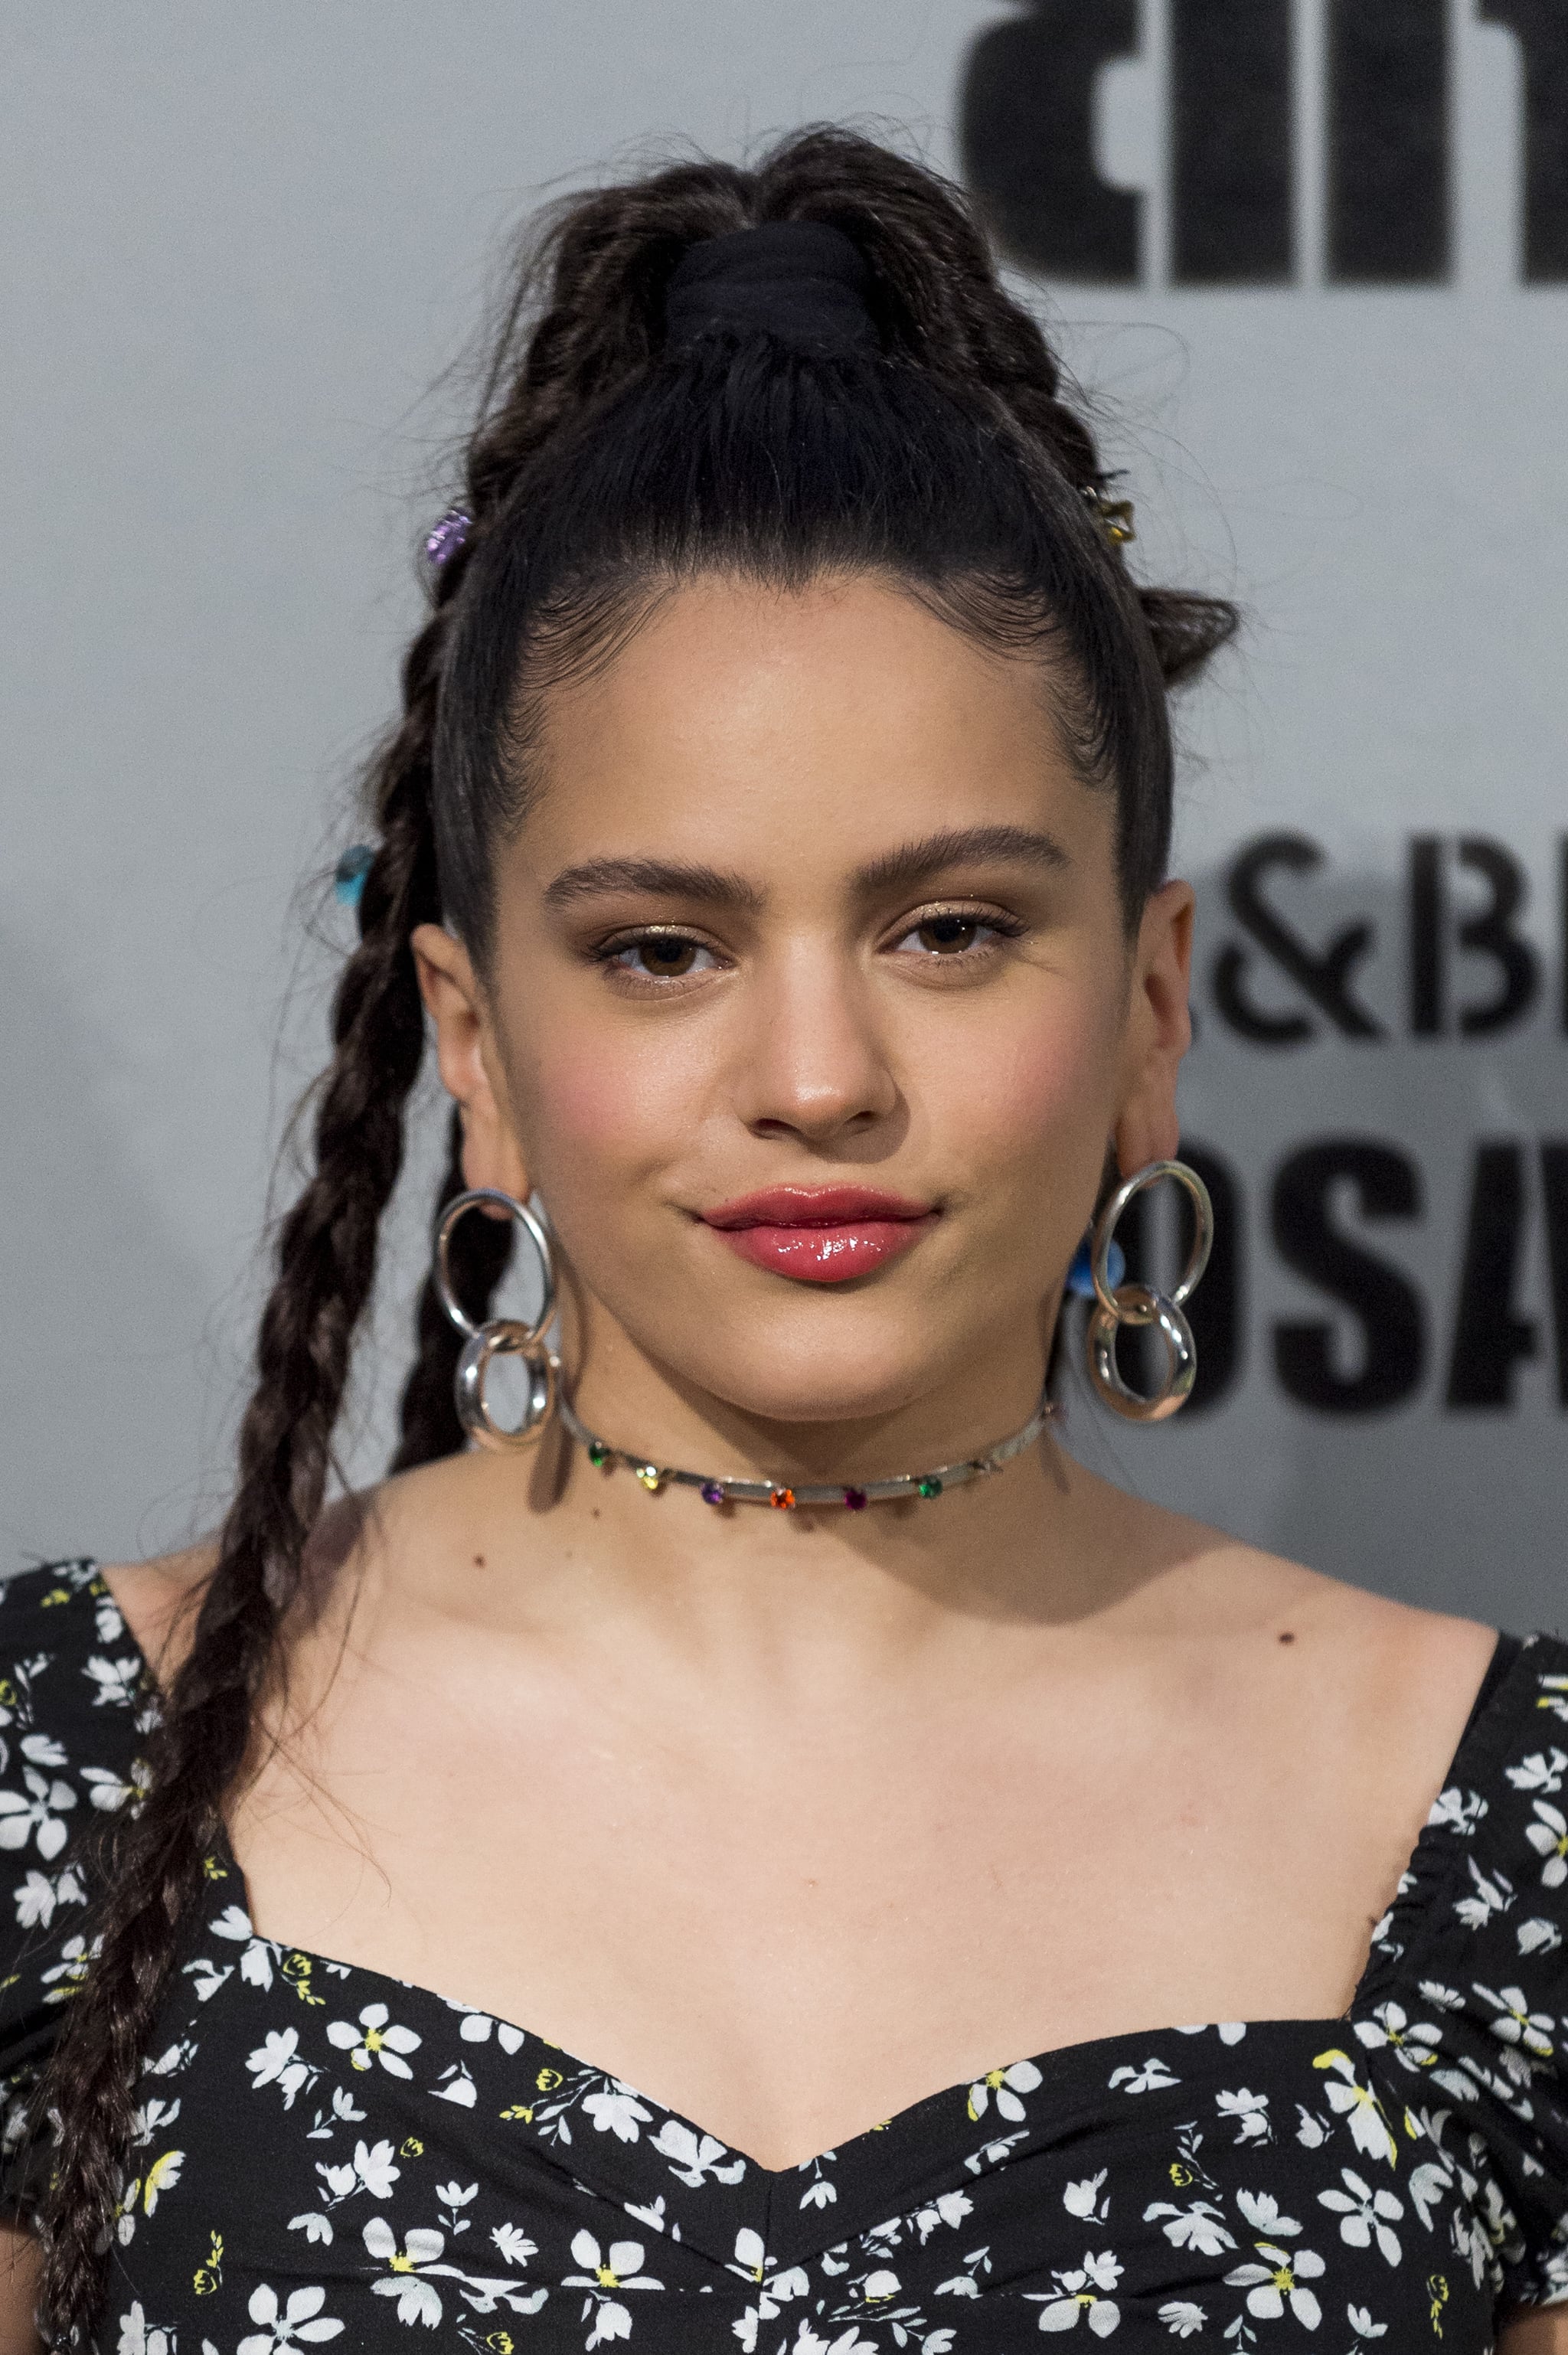 Alabama calcio Simposio Rosalía in 2019 at Pull & Bear By Rosalia Presentation In Madrid | Rosalía's  Beauty Evolution Over the Years Is Really Just 1 Big Beauty Inspo Page |  POPSUGAR Beauty Photo 11